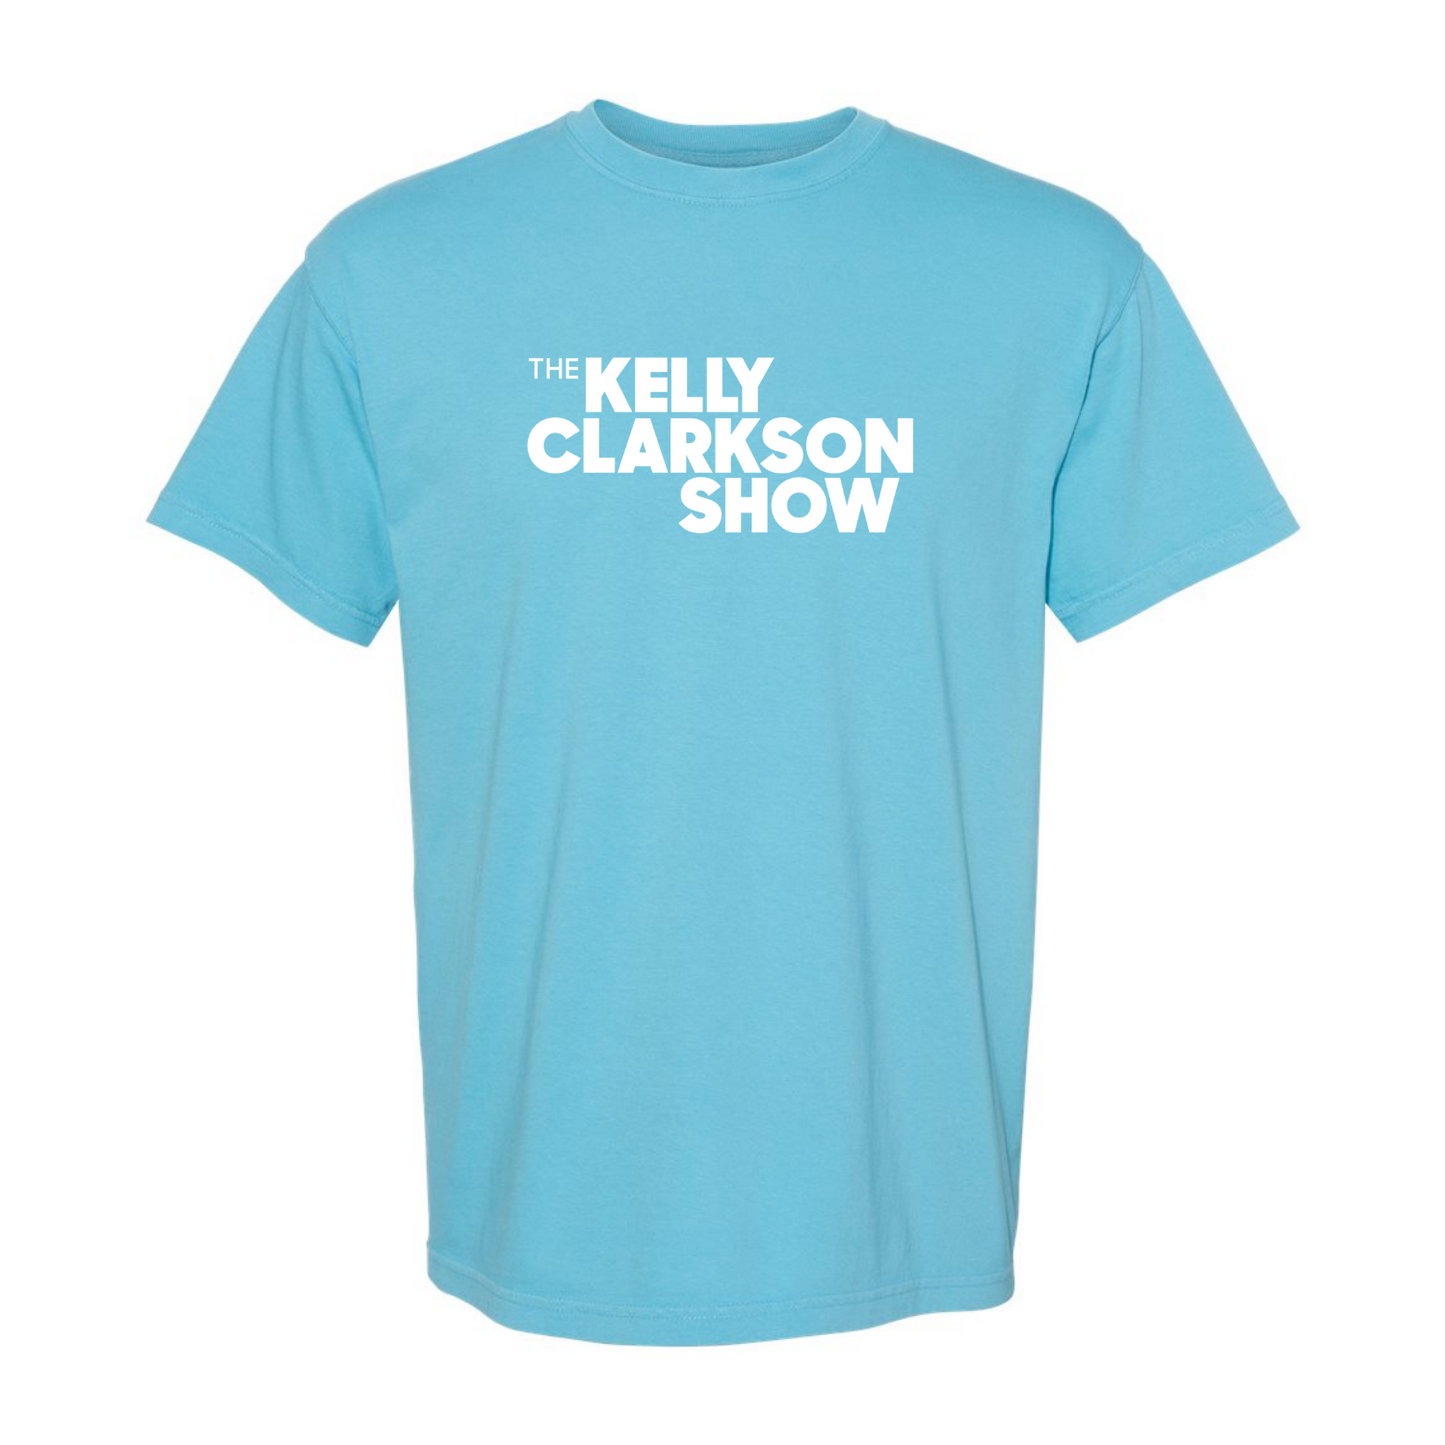 The Kelly Clarkson Show Garment-Dyed T-Shirt - Sapphire